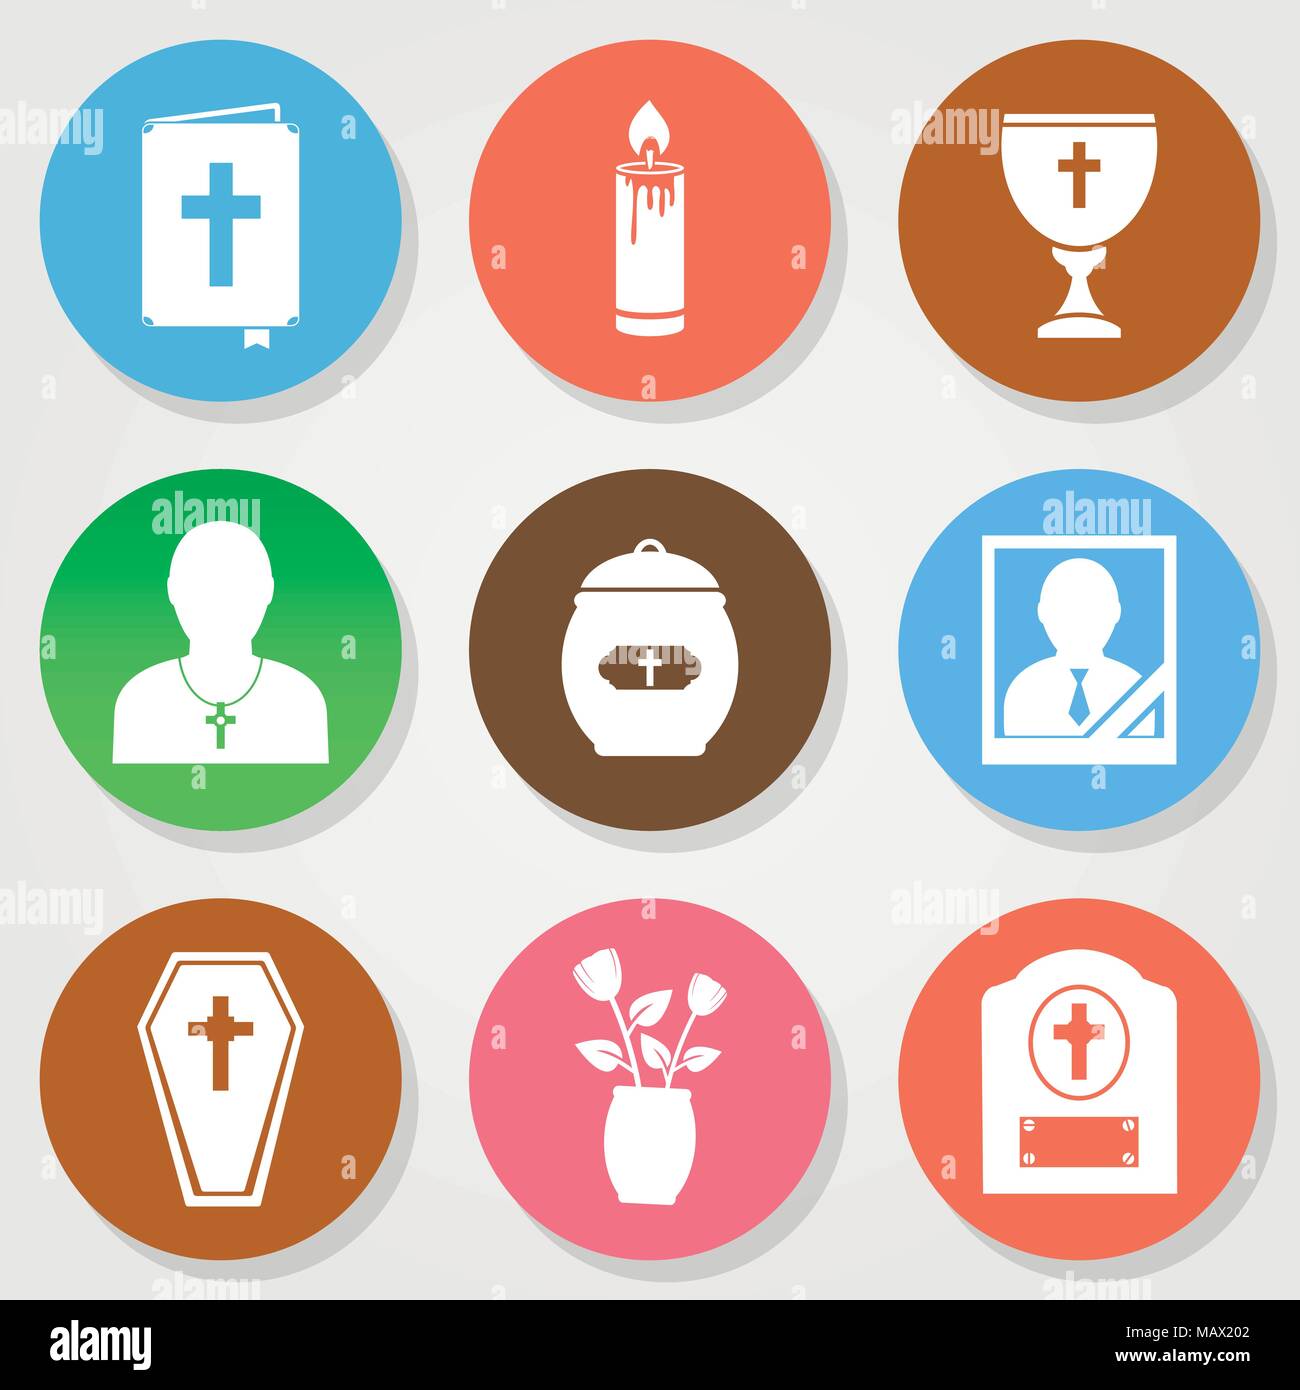 Rest in peace - vector round icons. Vector illustration. Stock Vector